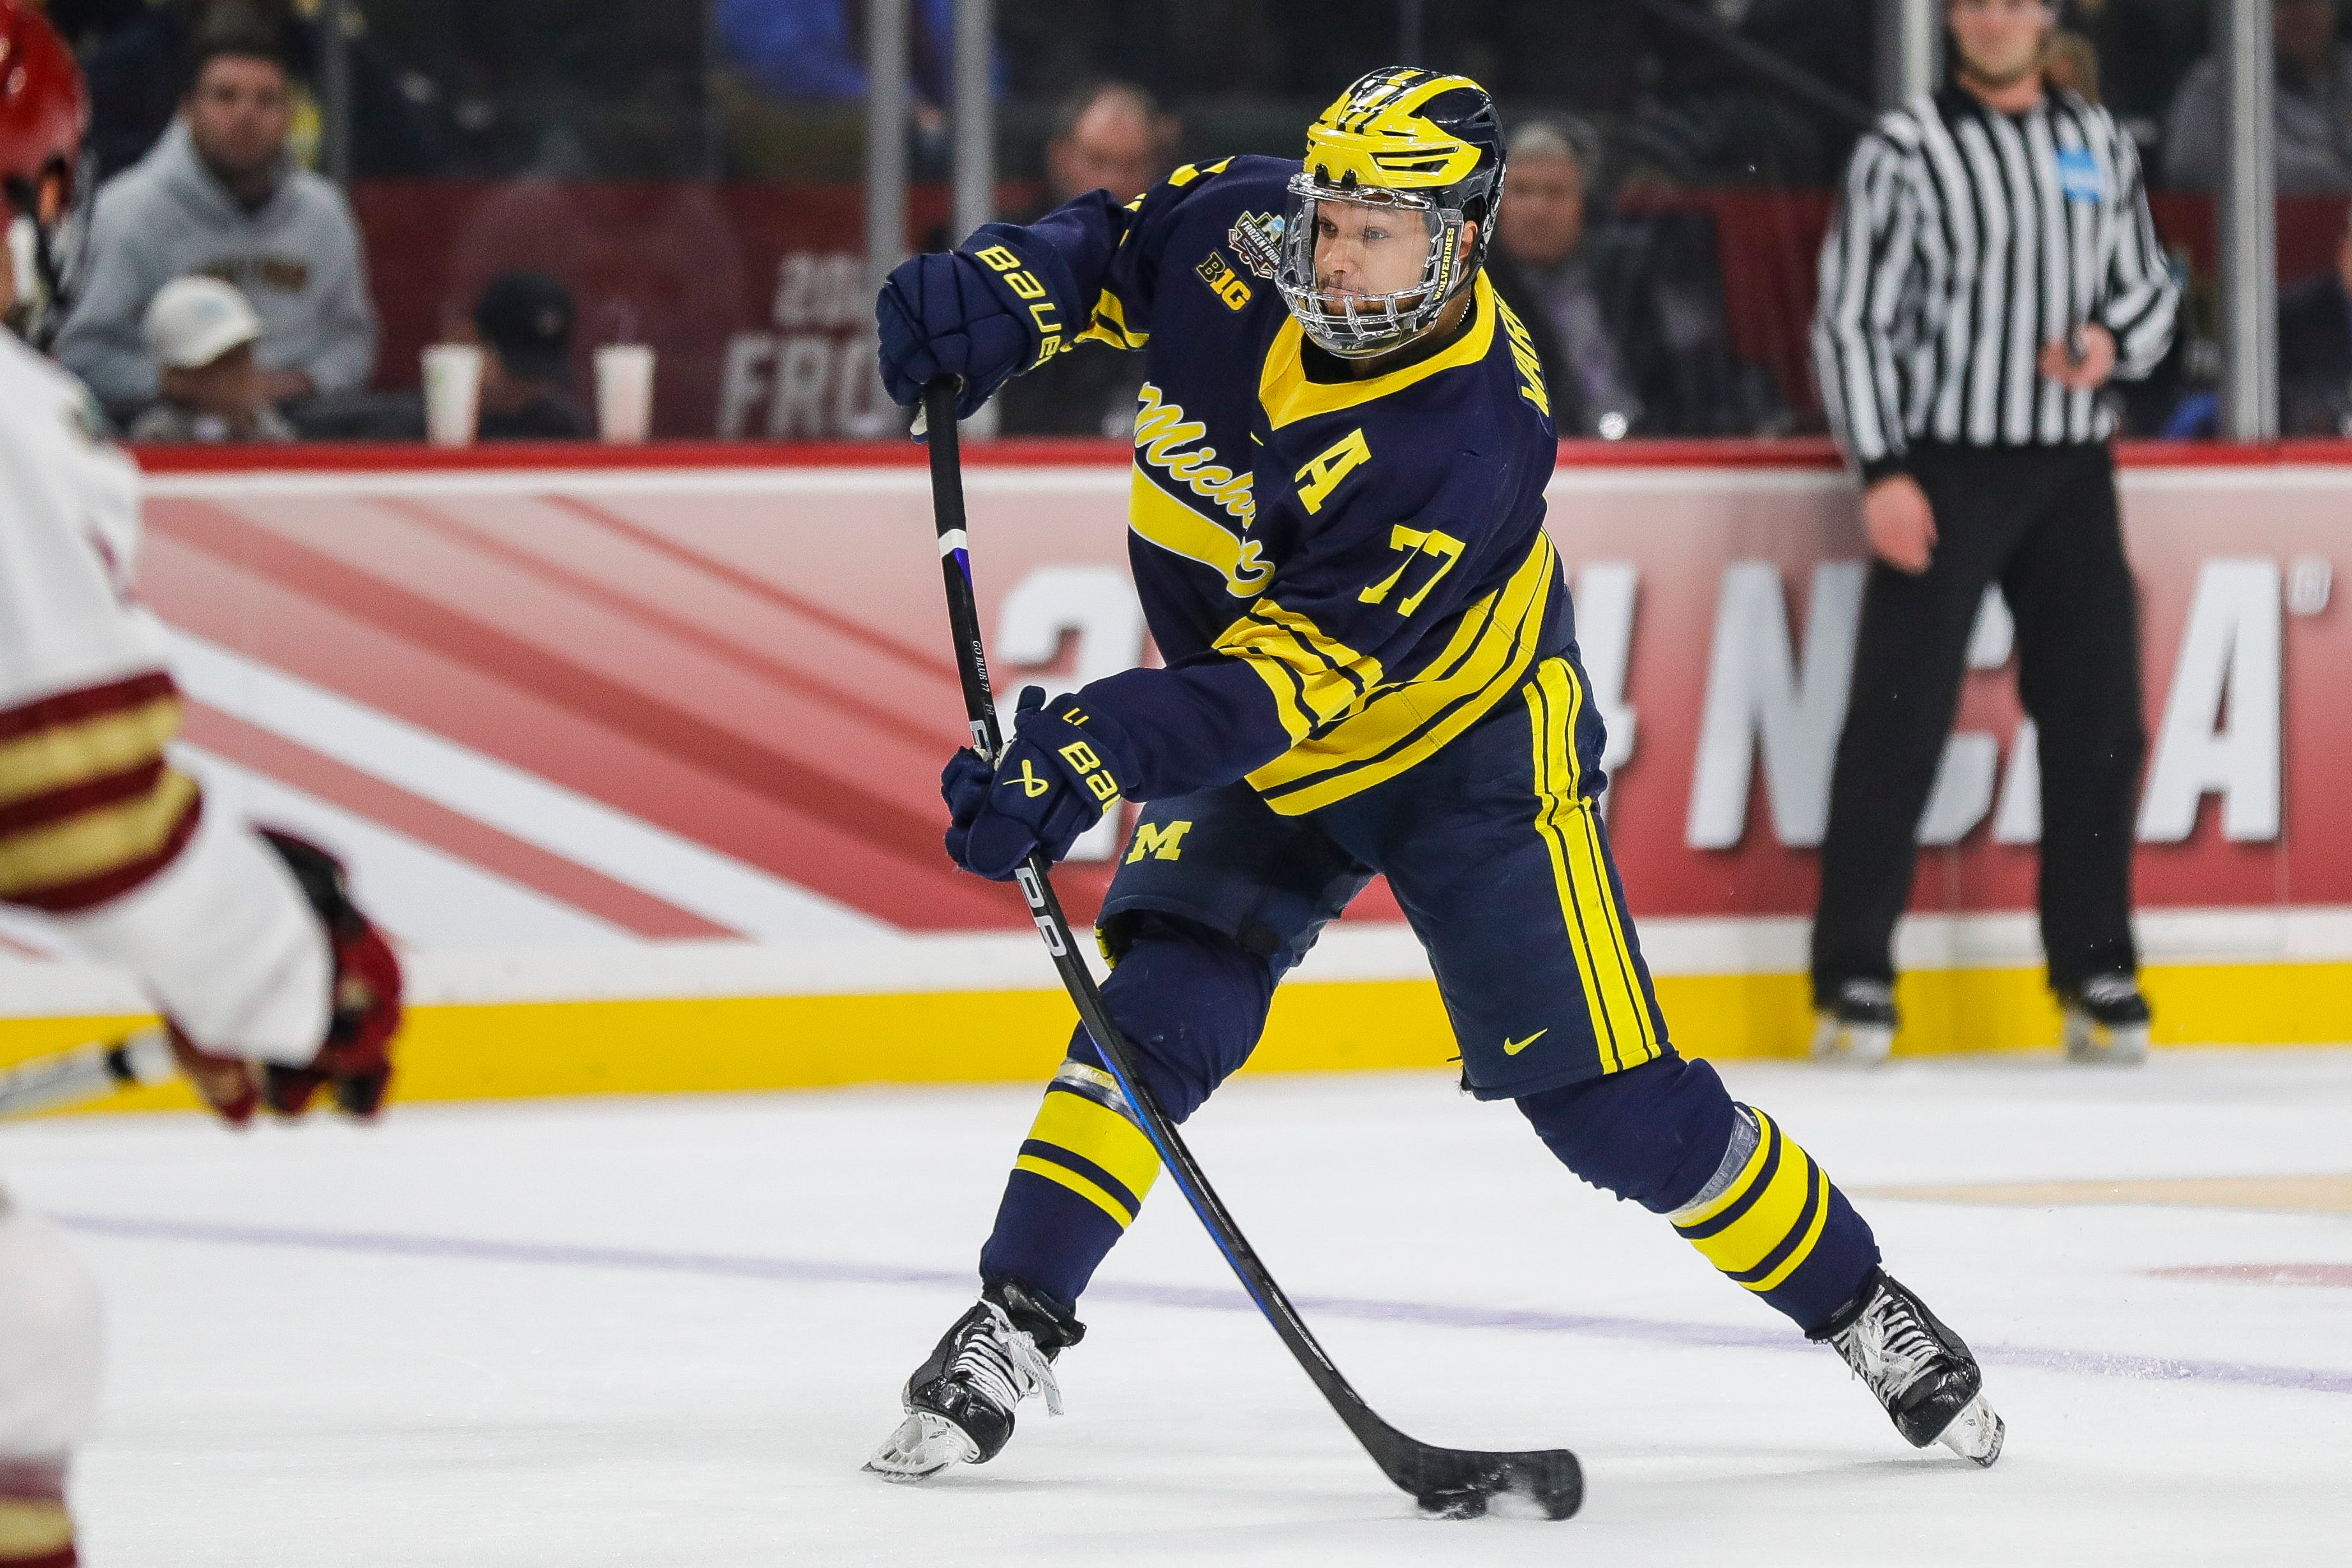 DRIVE TIME: Long Island hockey player signs with the NY Islanders